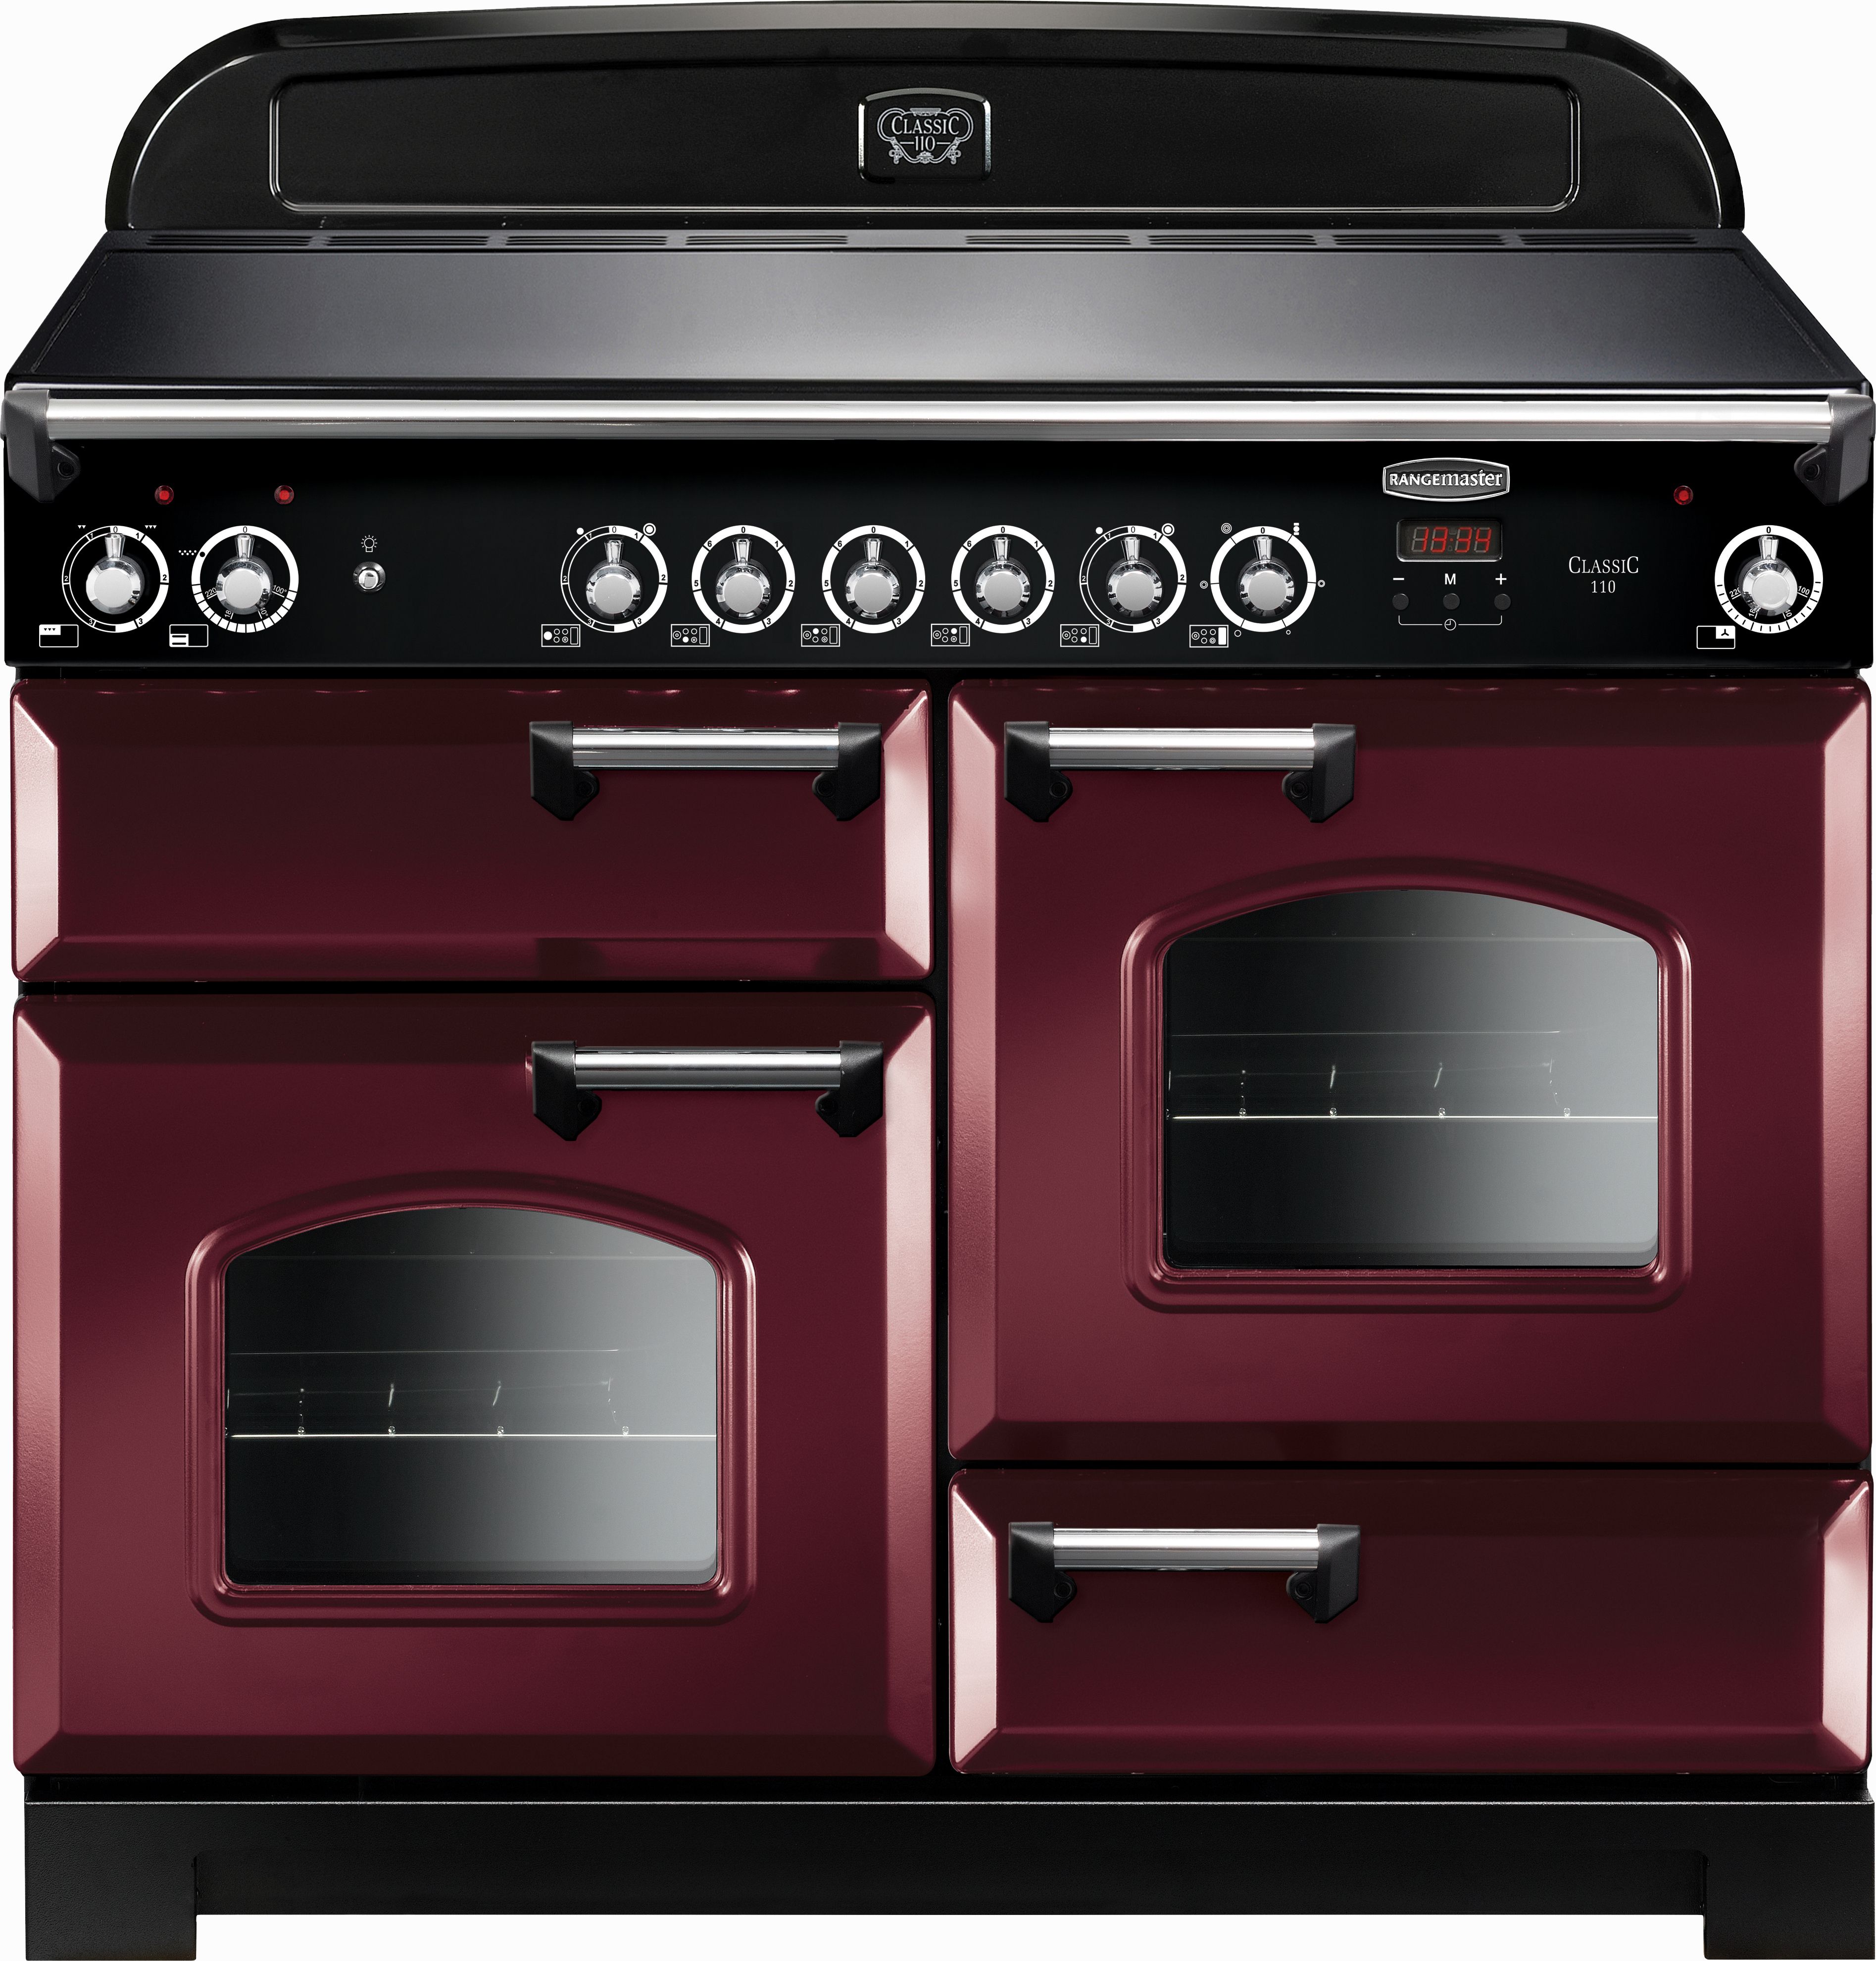 Rangemaster Classic CLA110ECCY/C 110cm Electric Range Cooker with Ceramic Hob - Cranberry / Chrome - A/A Rated, Red